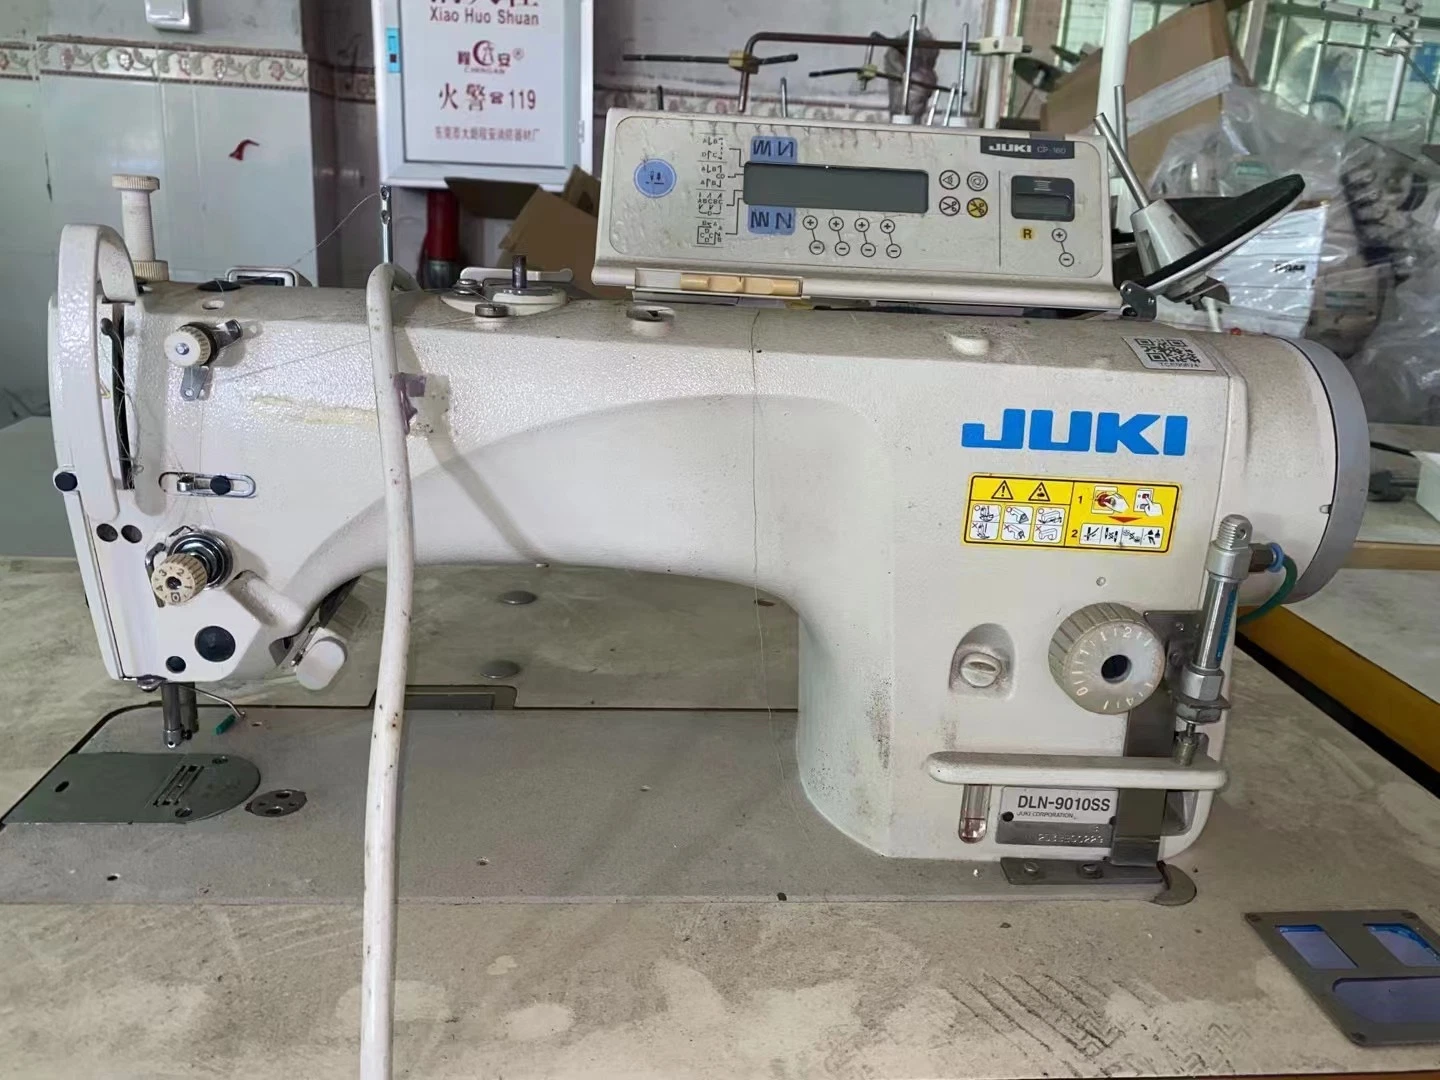 Juki Dln 9010 Needle Feed Used Sewing Machine Secondhand Maquinas De Coser